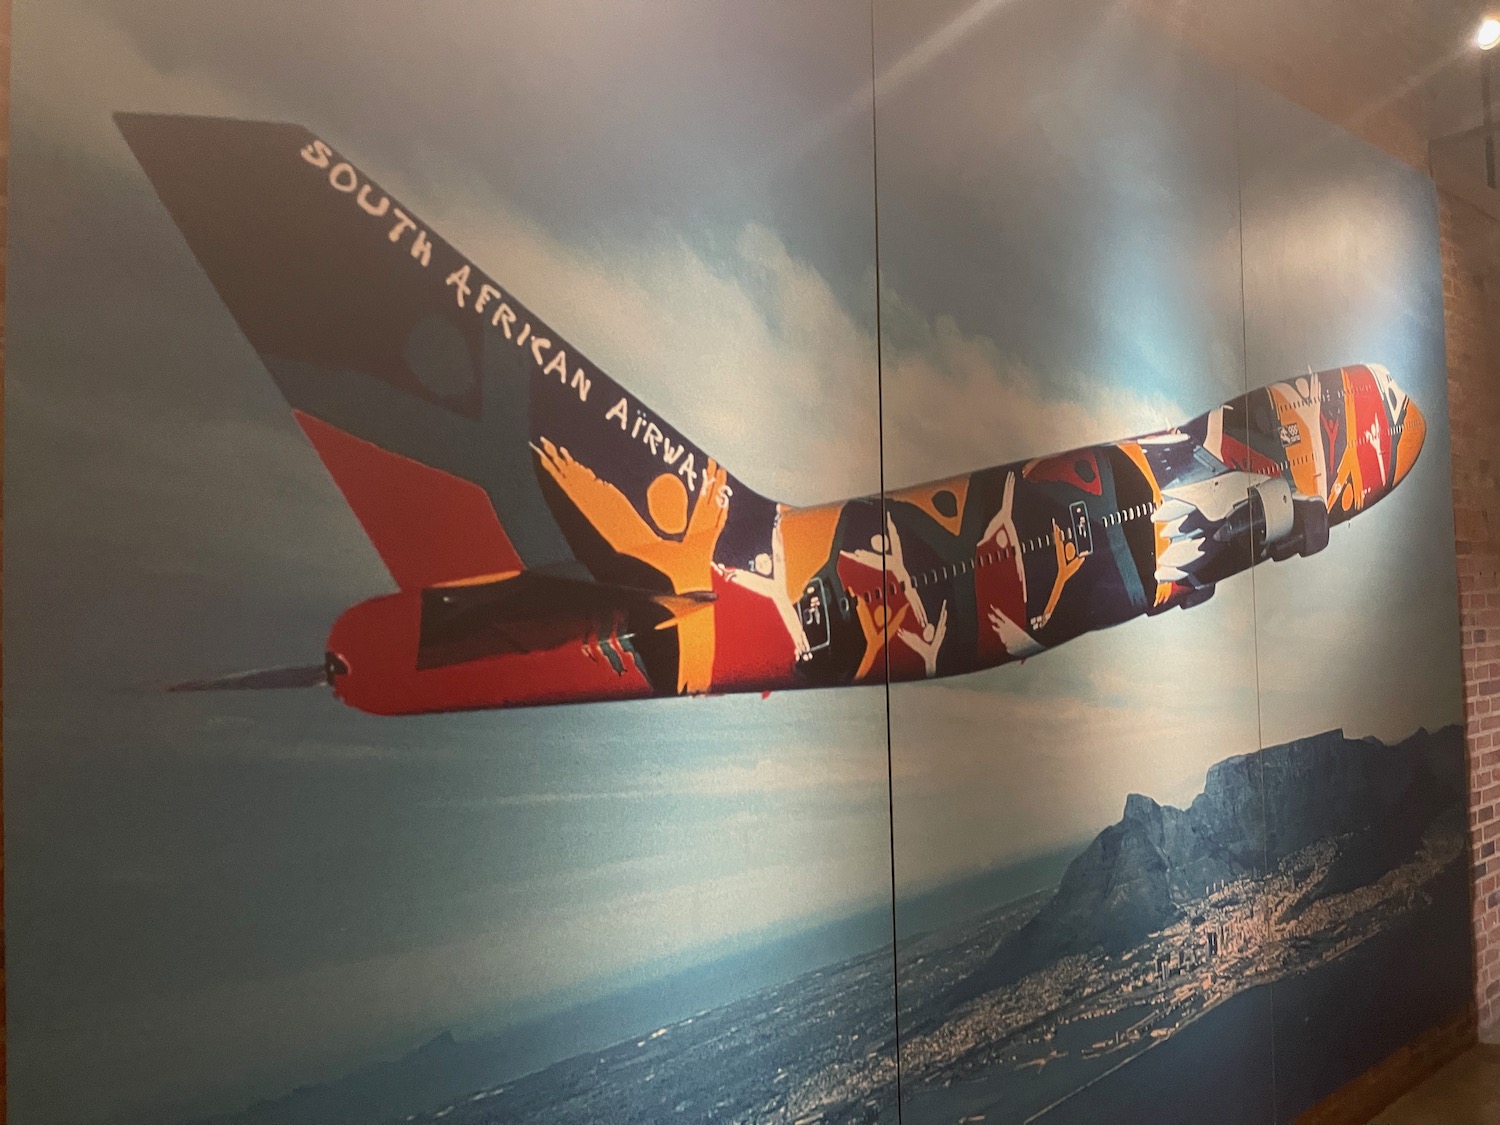 a painting of a plane on a wall